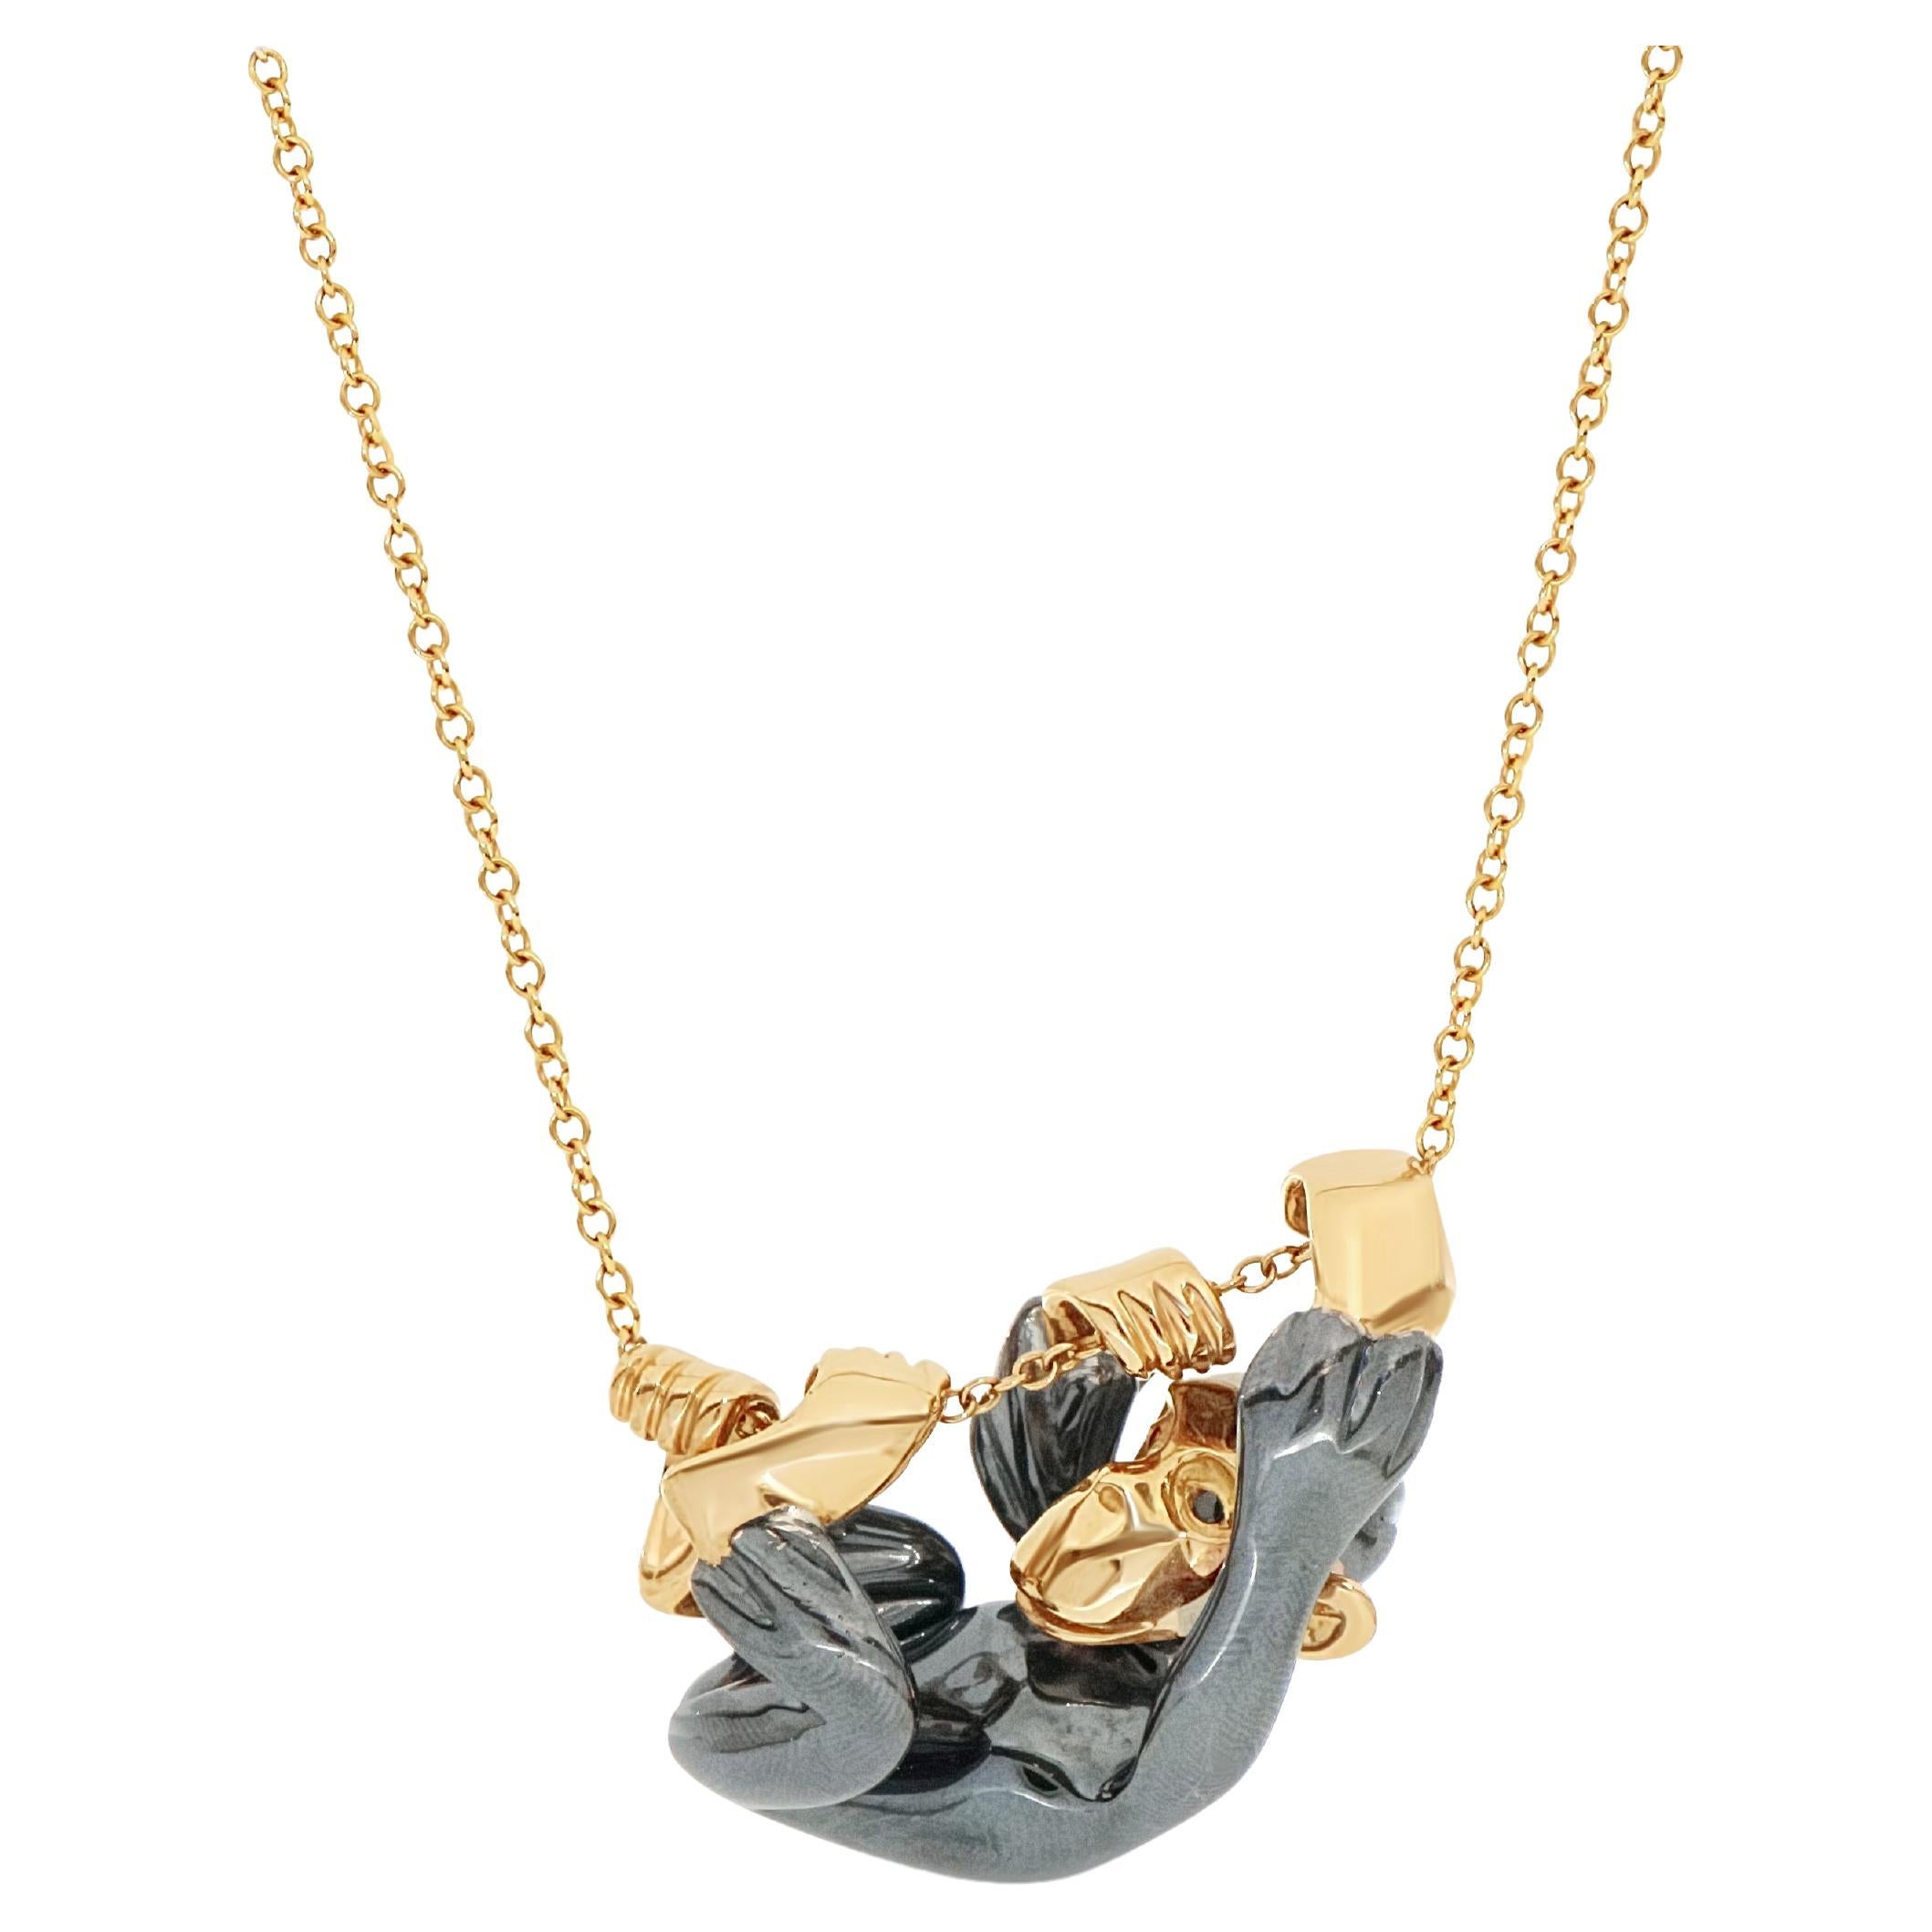 52.30gr Chimp on a Liana Pendant Necklace in 18 Karat Gold For Sale